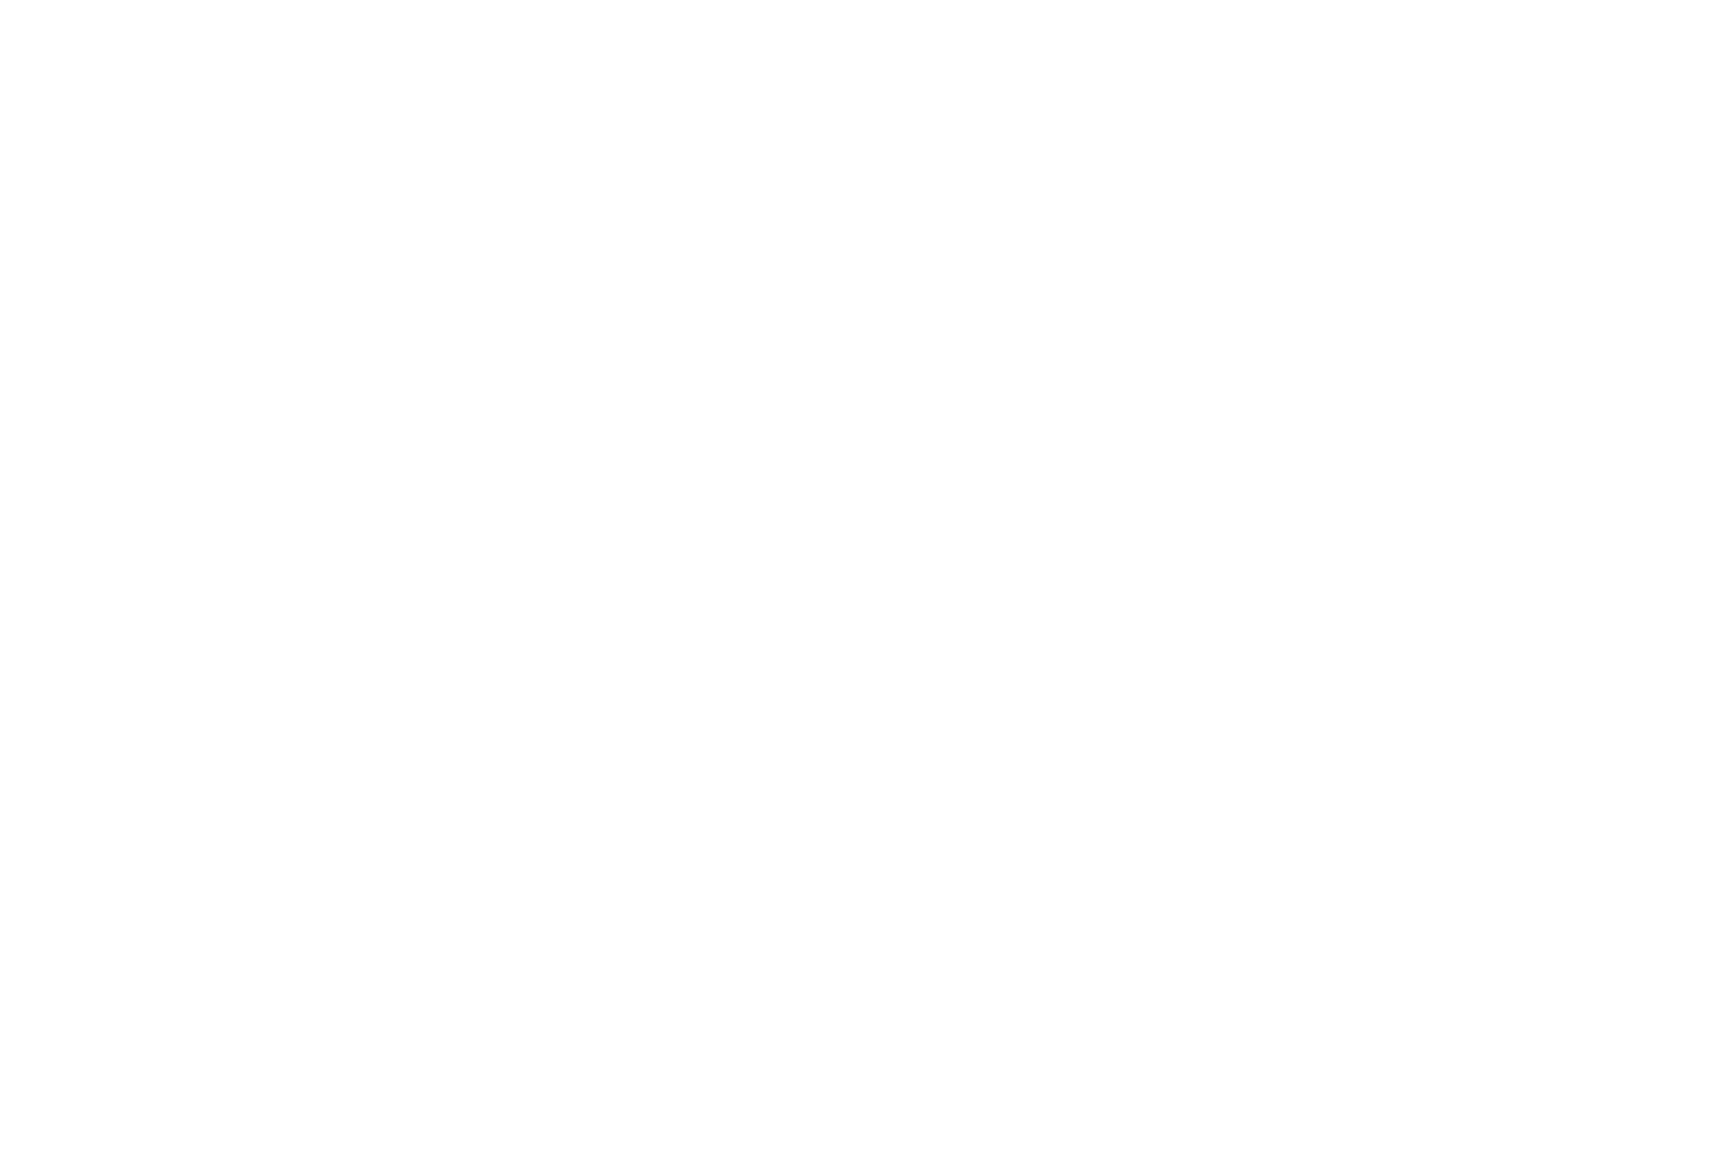 Best Female Director - Red Moon Film Festival - 2022 W on B.png